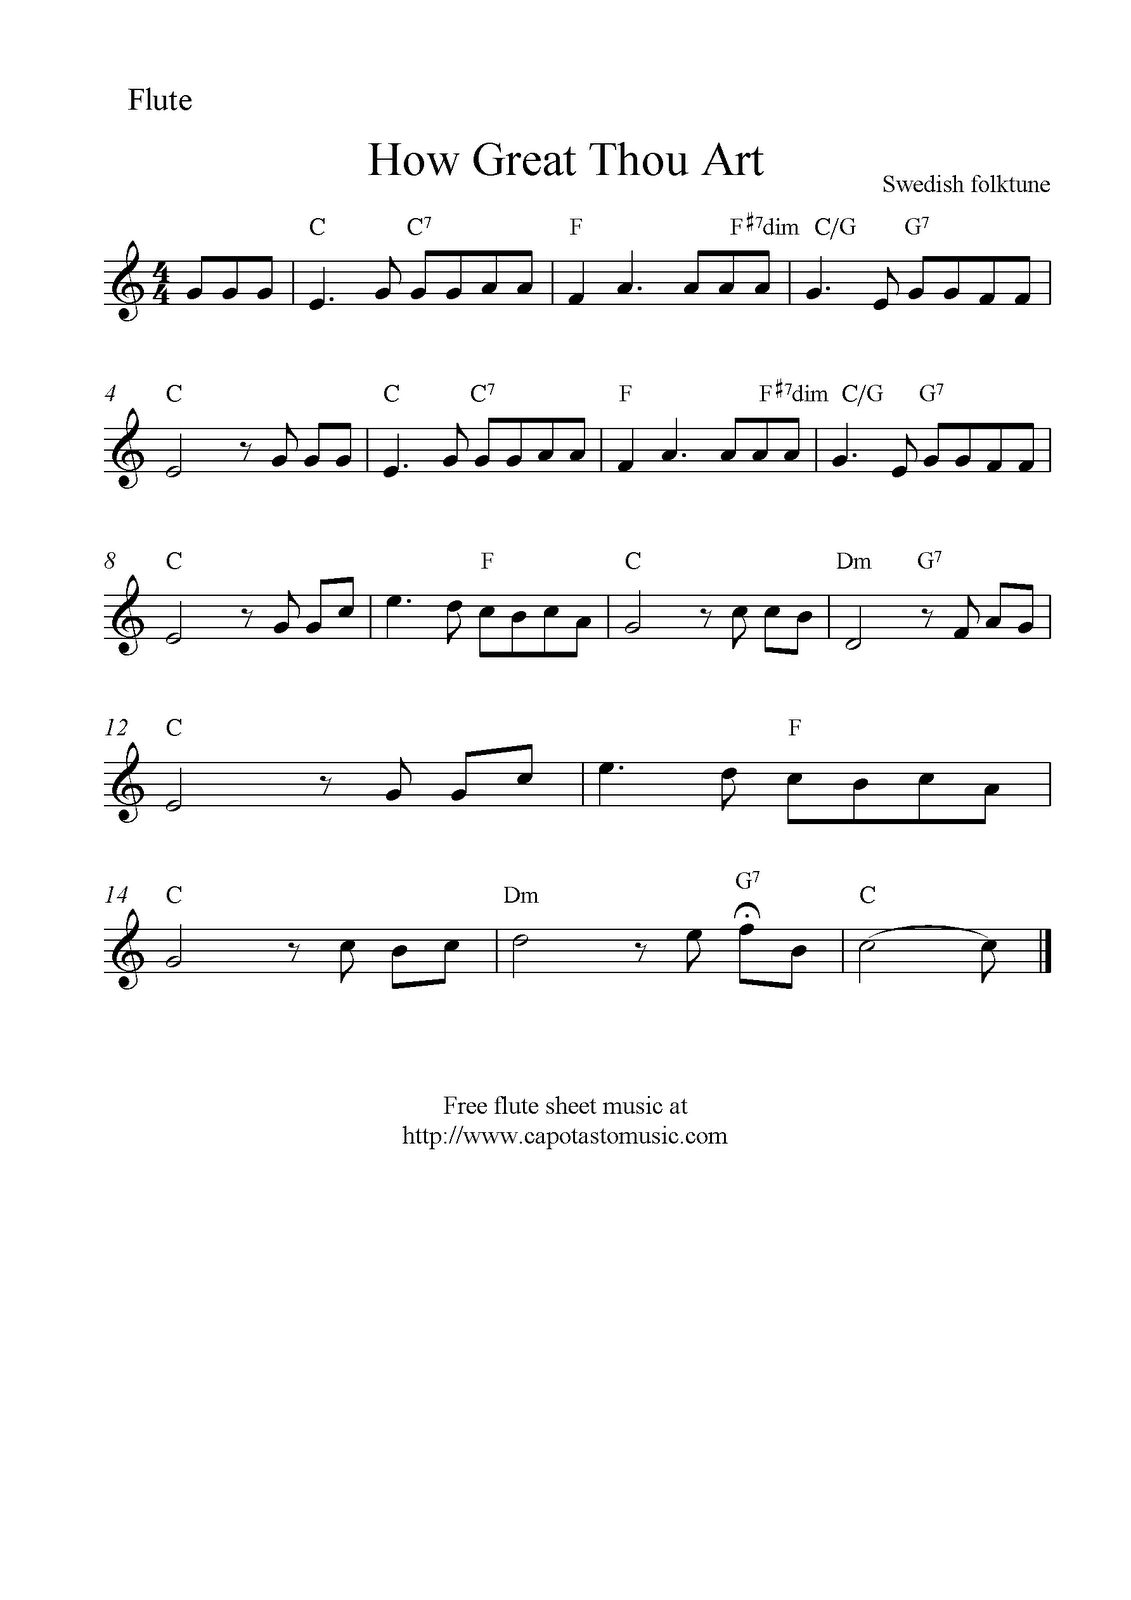 How Great Thou Art Chords How Great Thou Art Free Christian Flute Sheet Music Notes